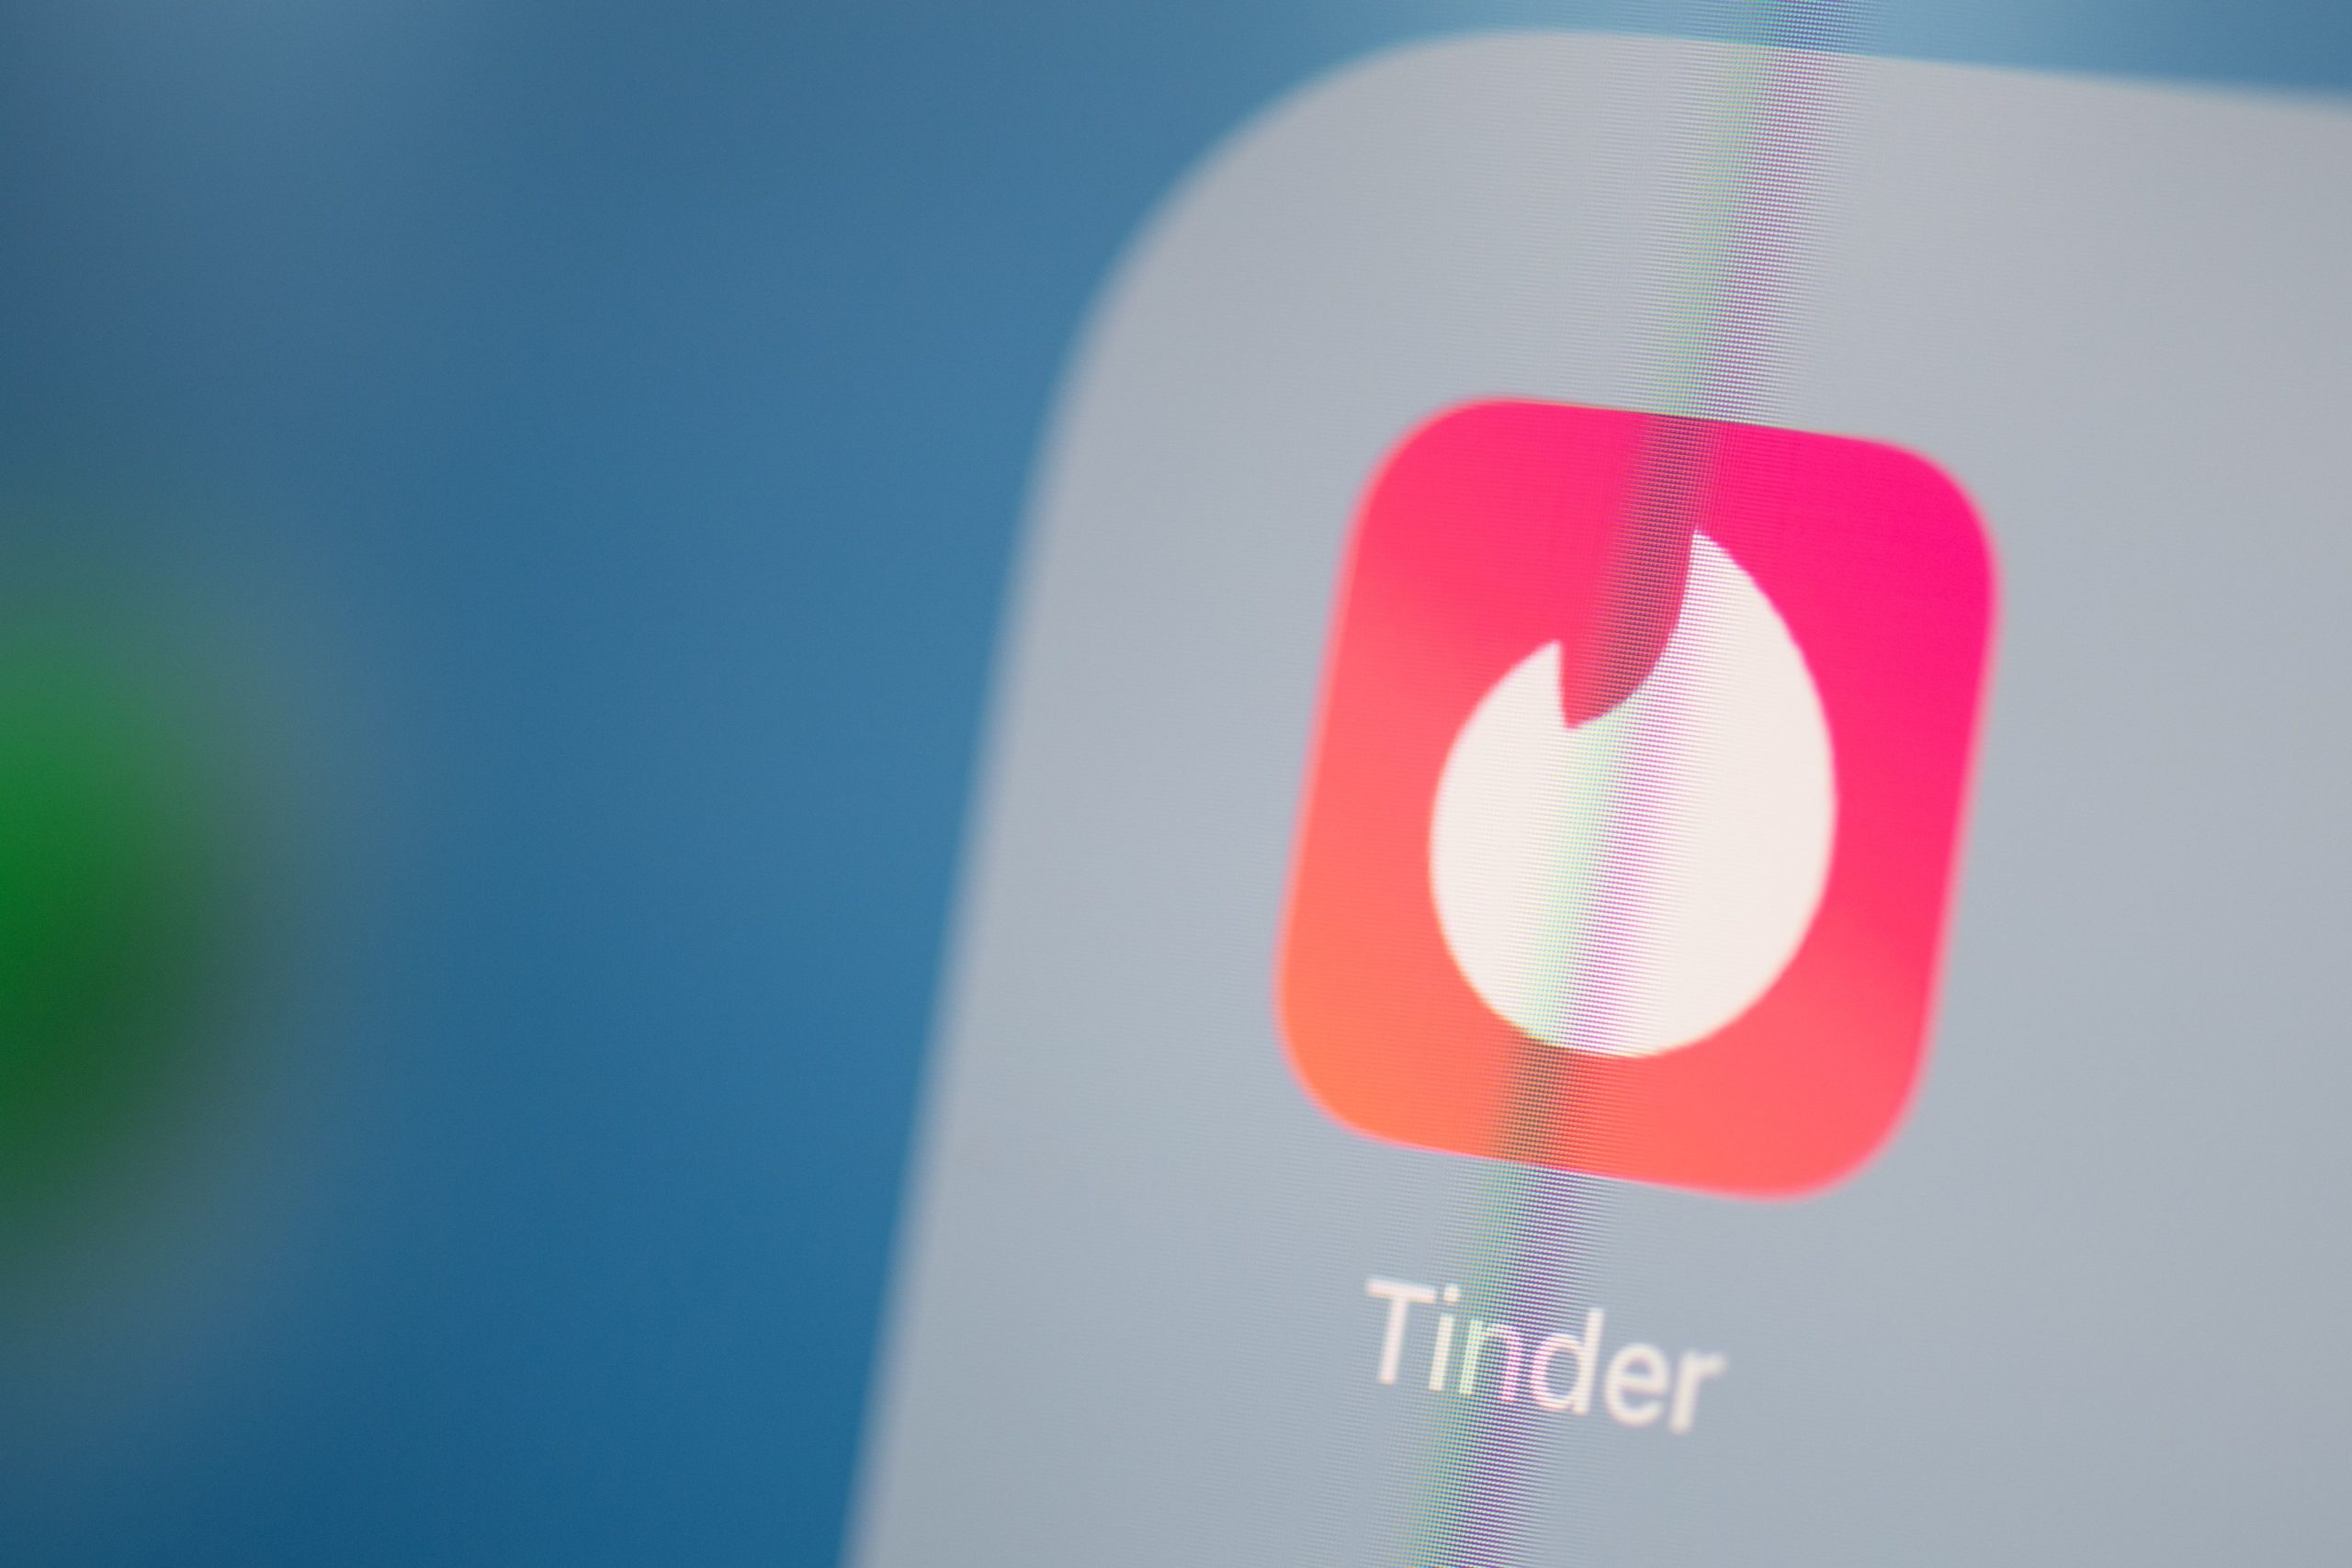 This illustration picture taken on July 24, 2019 in Paris shows the logo of the US social networking application Tinder on the screen of a tablet. (Photo by MARTIN BUREAU/AFP via Getty Images)